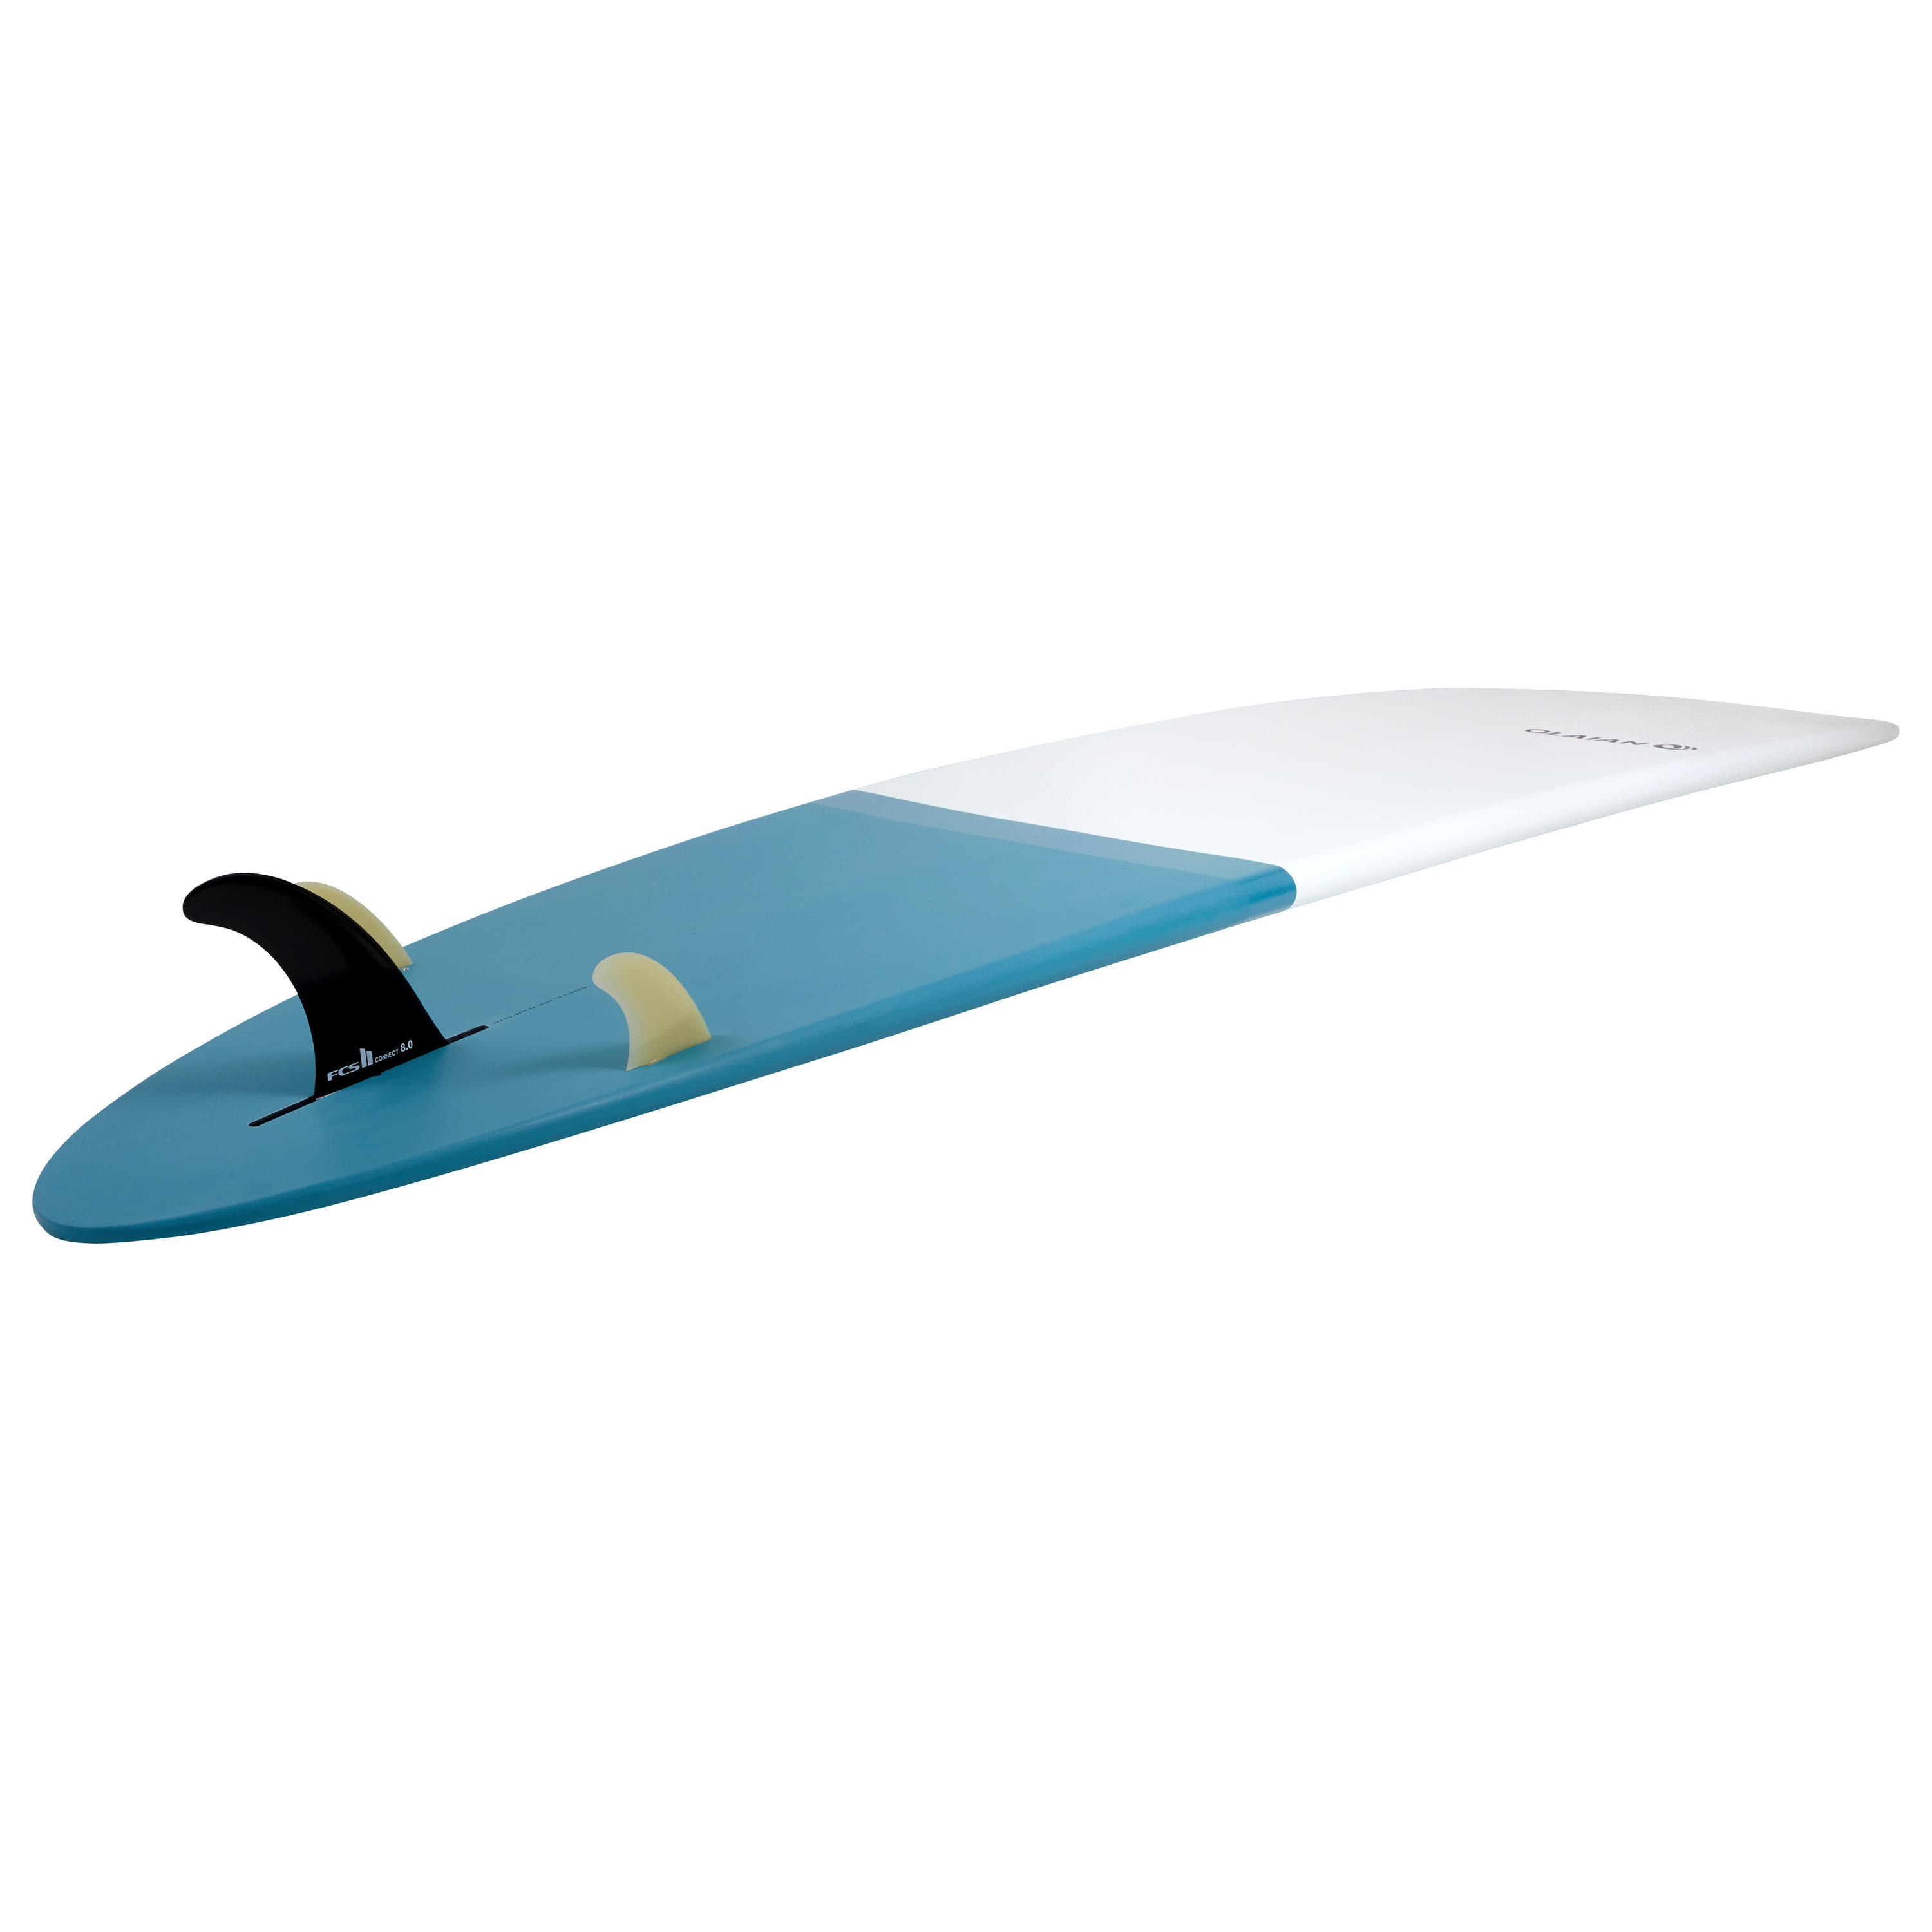 SURFBOARD LONGBOARD 900 Performance 9'. Comes with 2+1 fins. 4/10